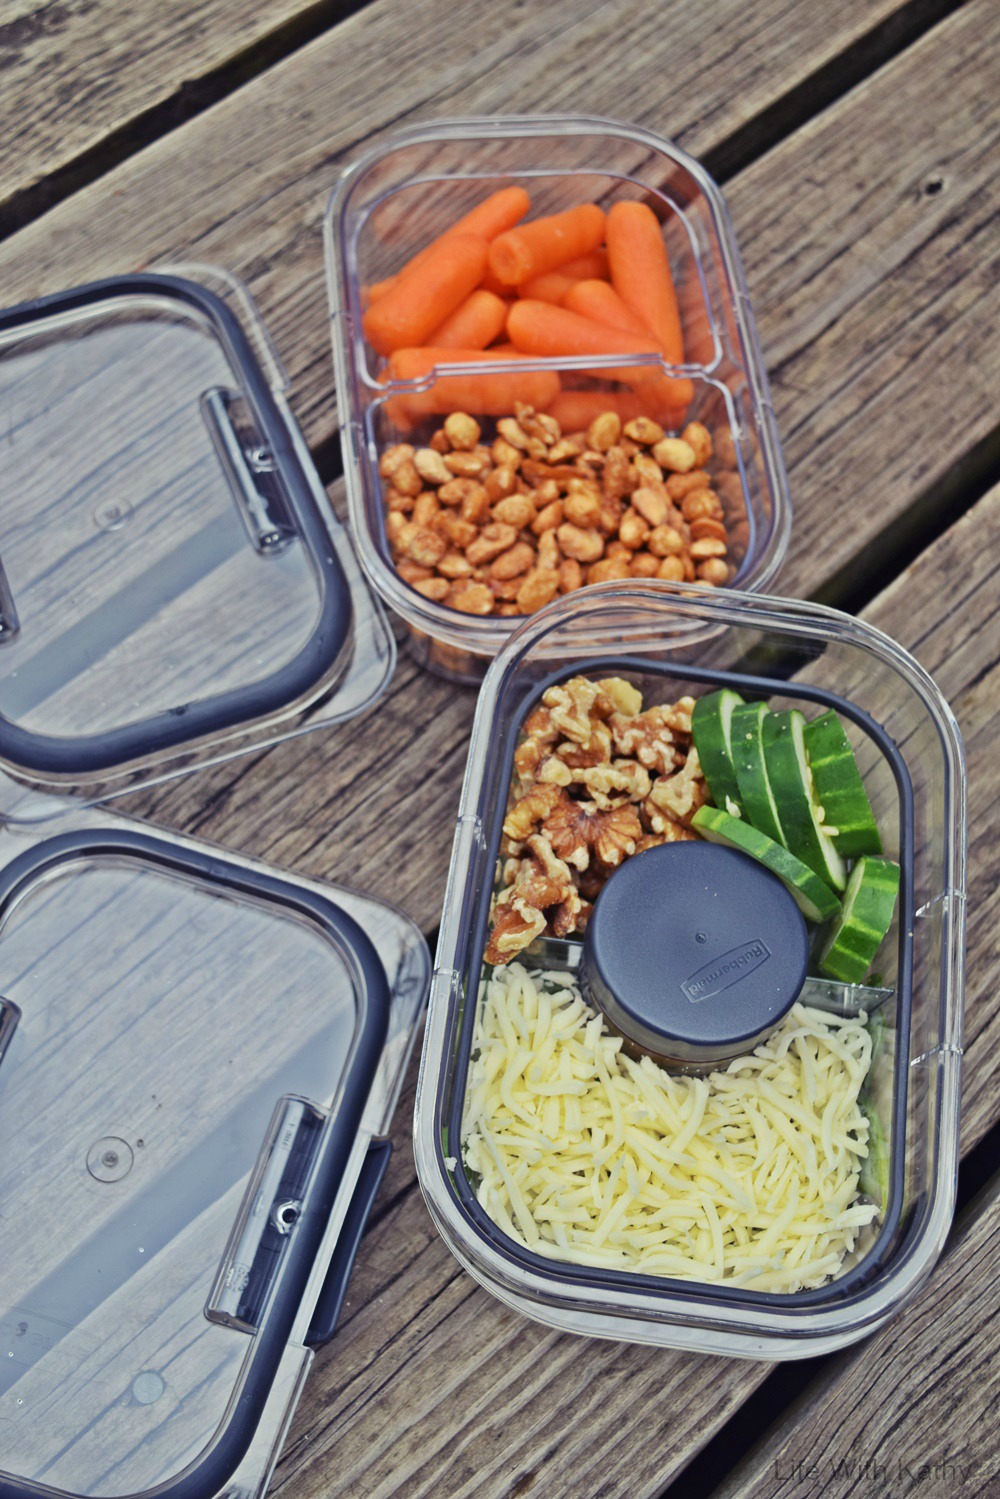 7 Salad Containers Perfect for Leak-Proof Lunches